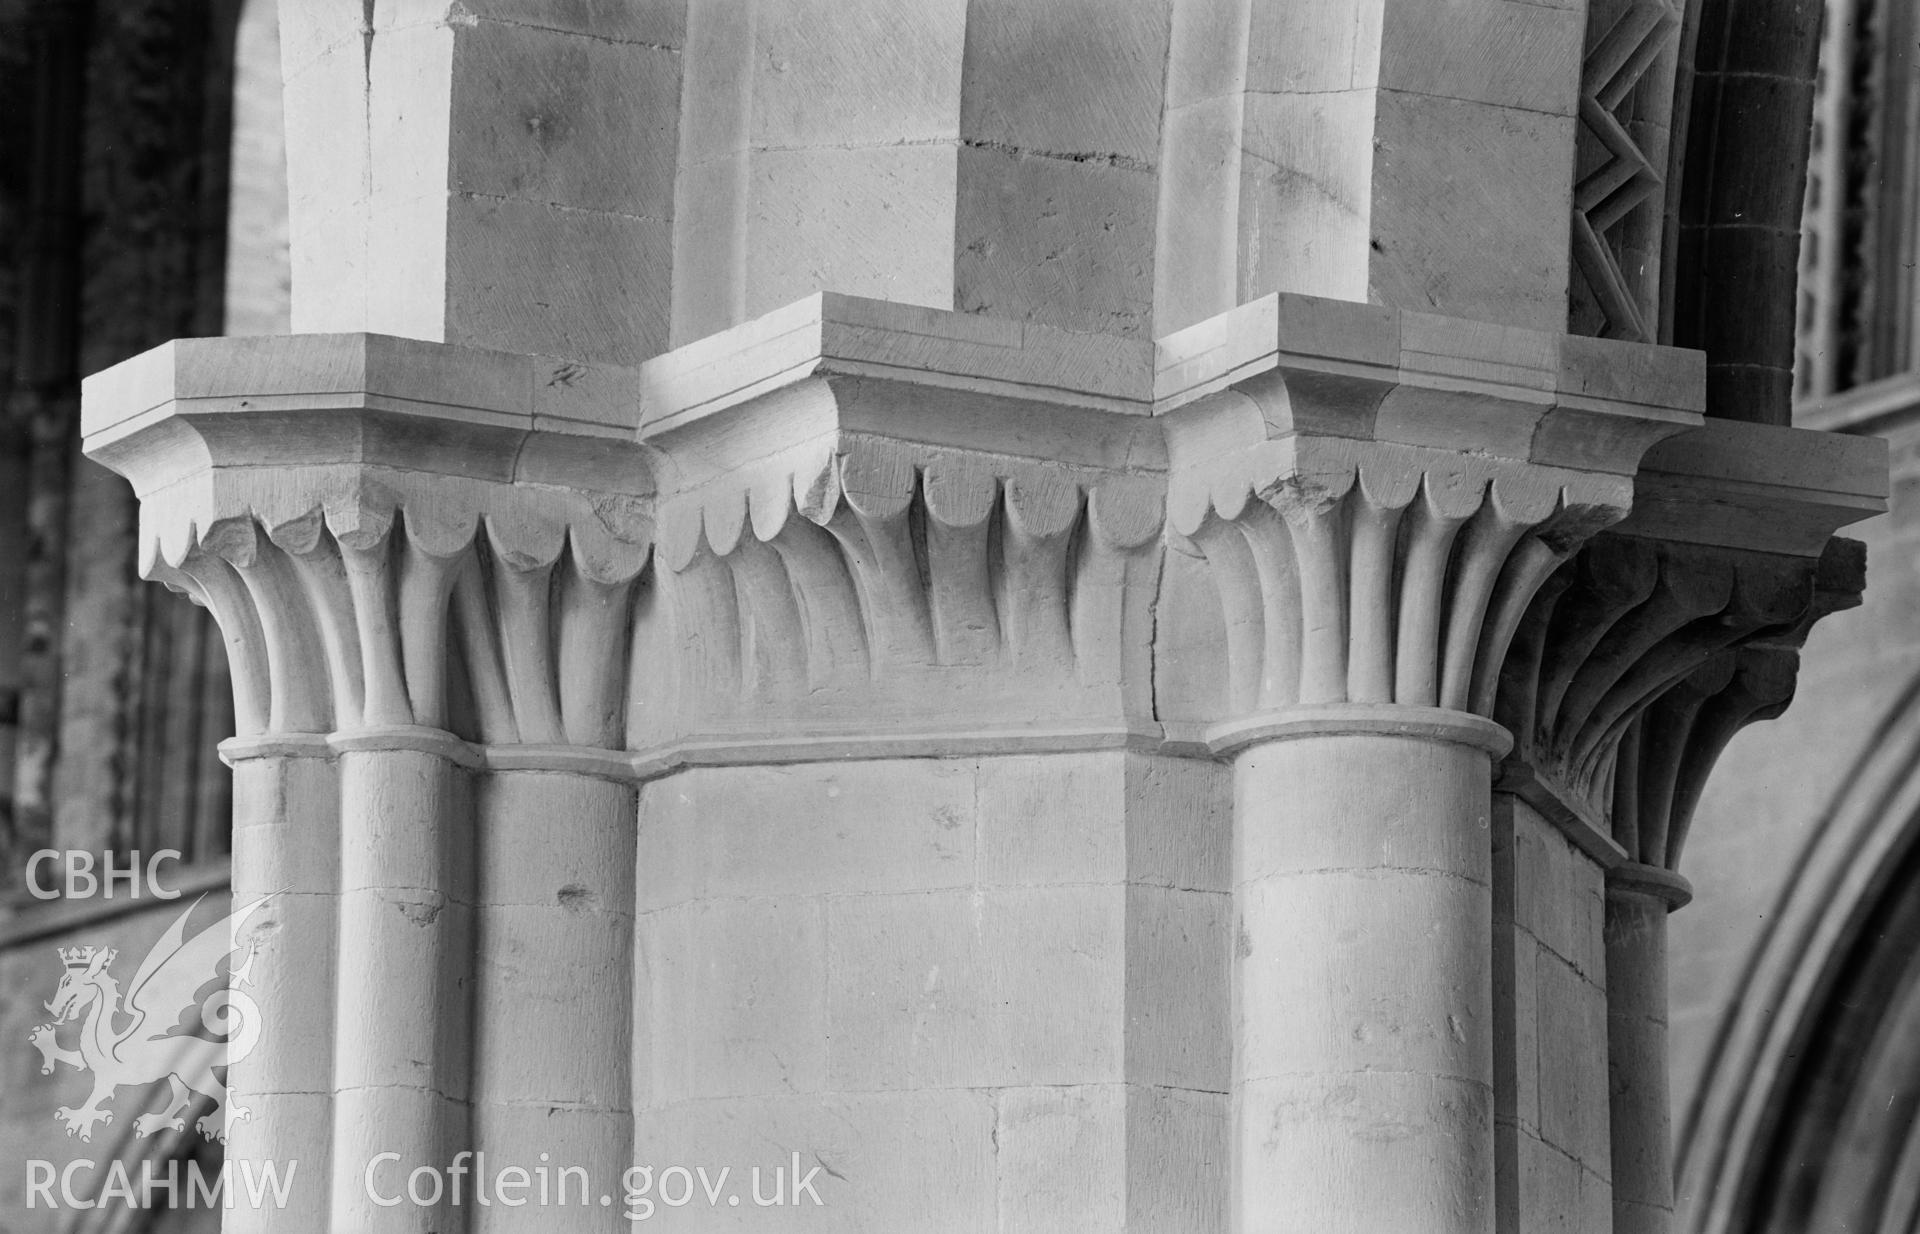 Digital copy of a black and white nitrate negative showing detail of capital at St. David's Cathedral, taken by E.W. Lovegrove, July 1936